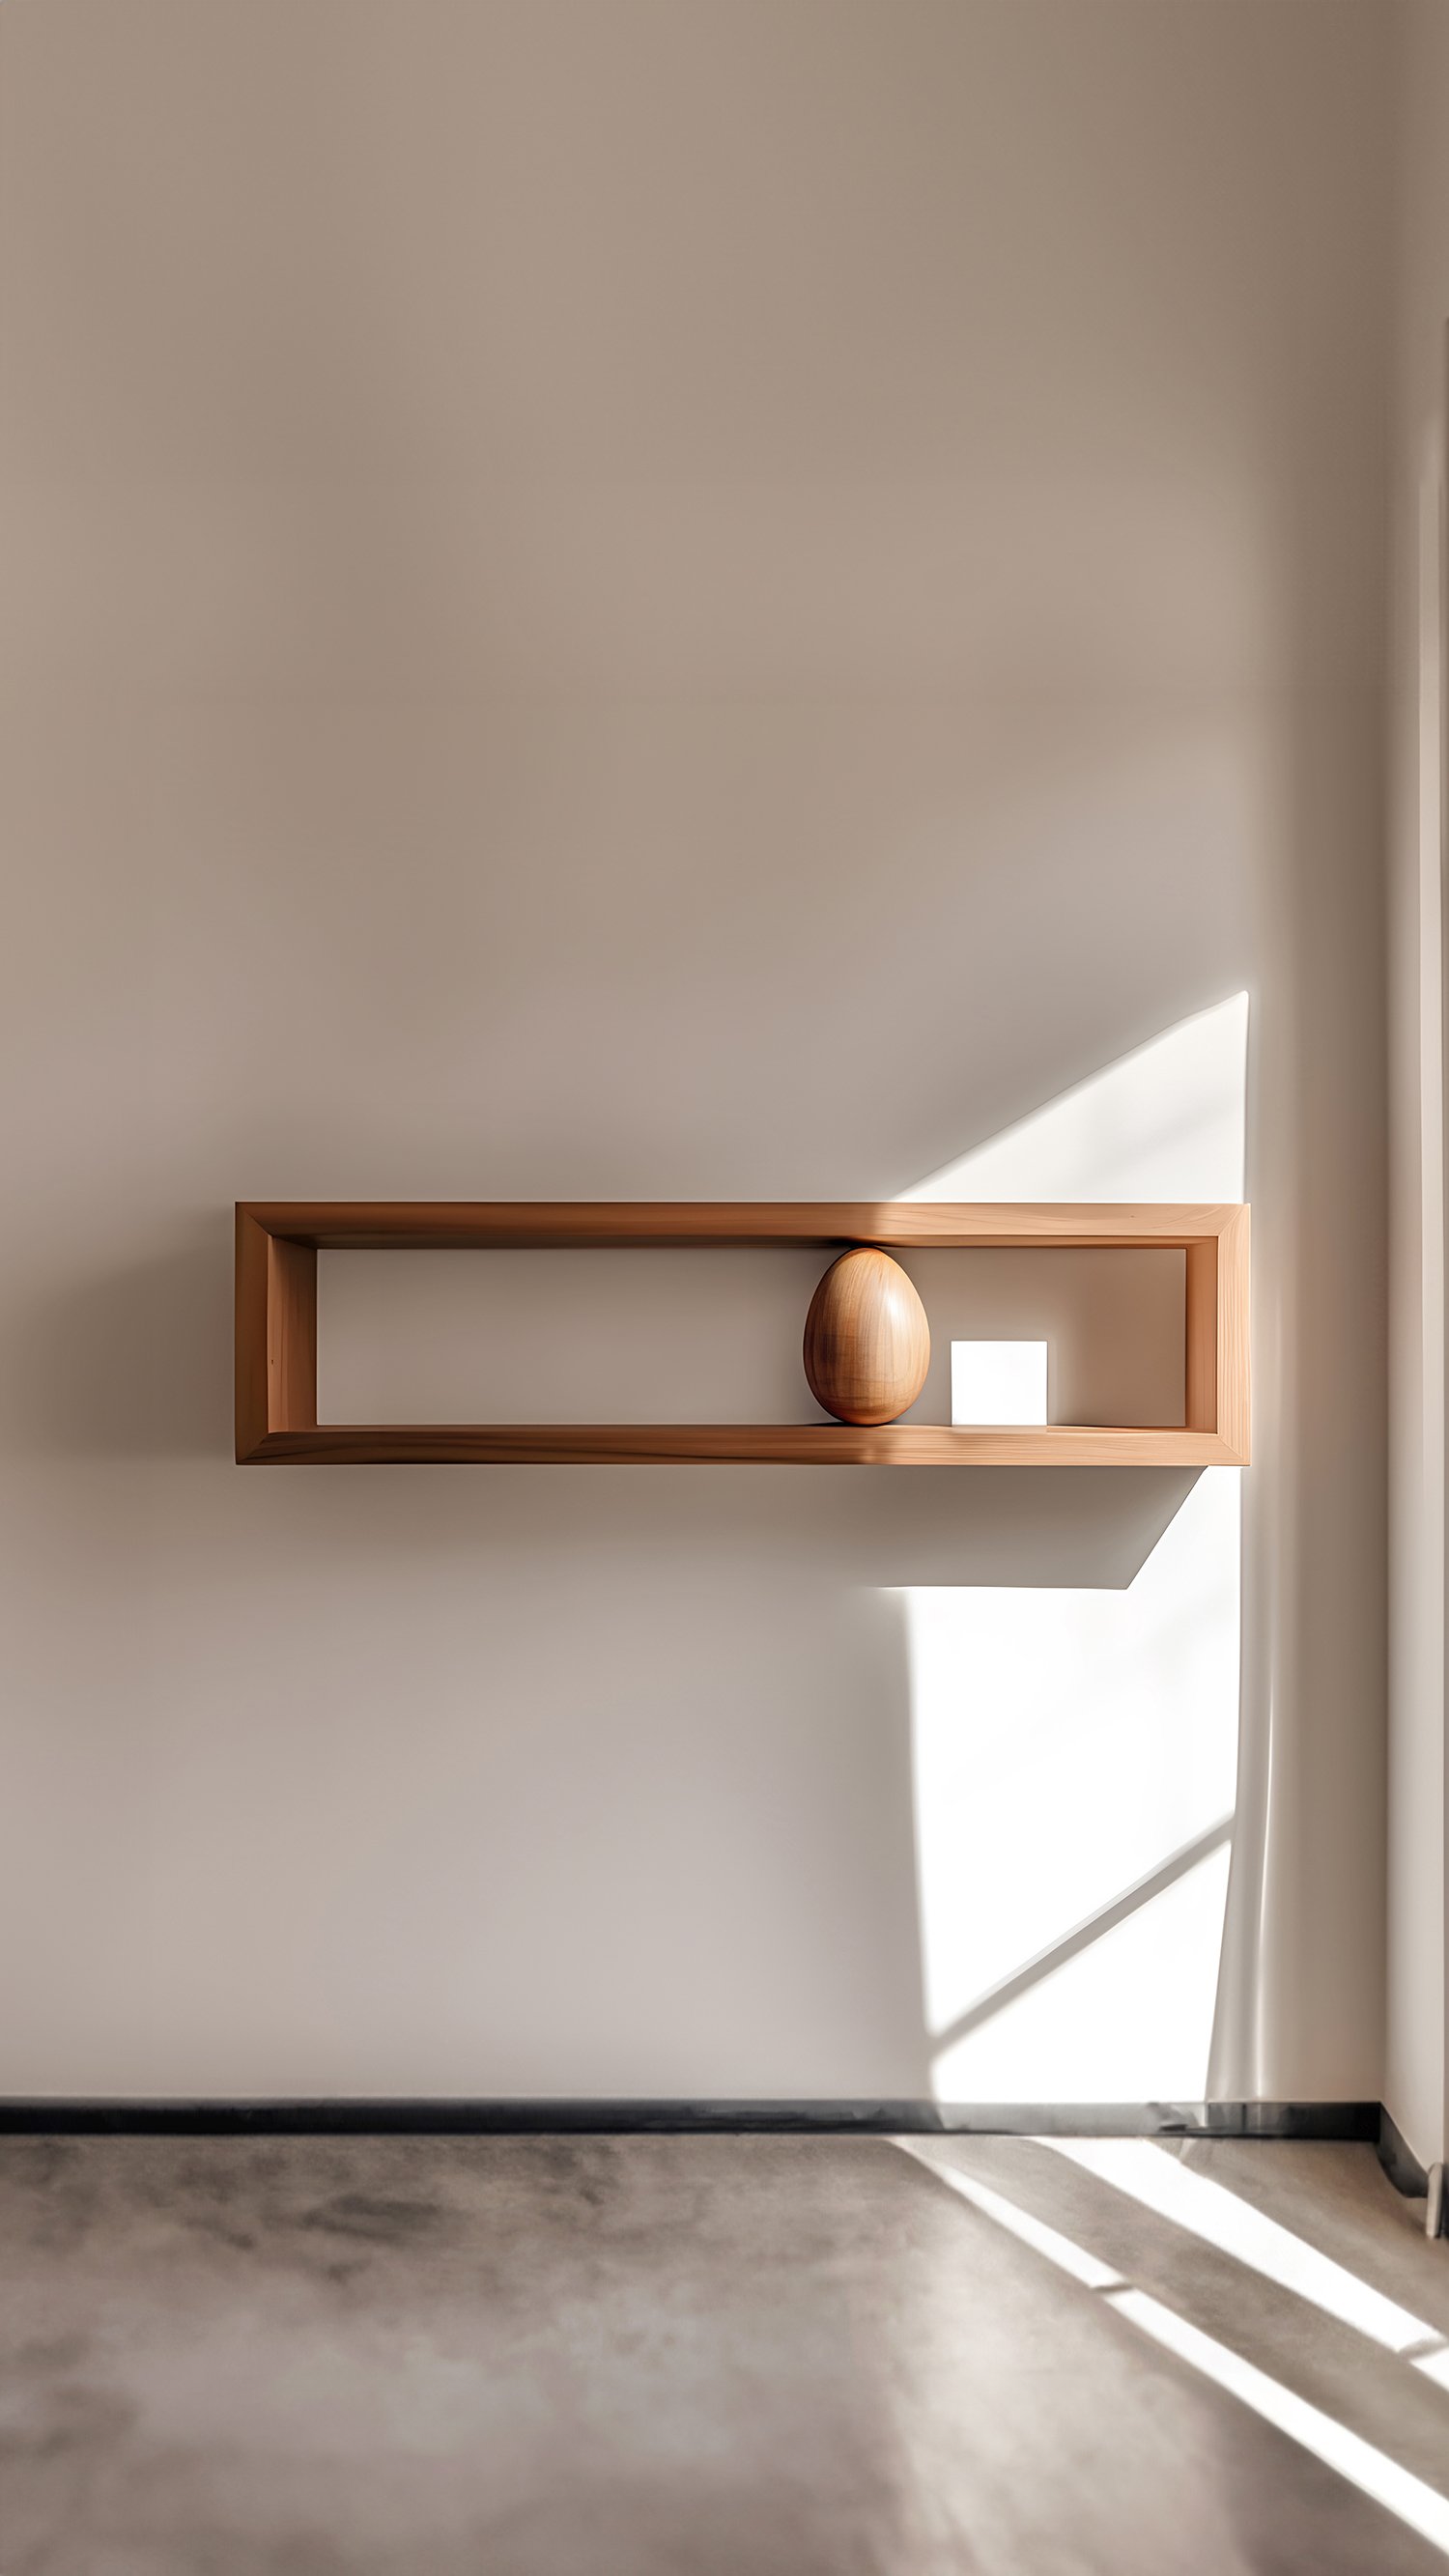 Rectangular Floating Shelf with One Sculptural Wooden Pebble Accent, Sereno by Joel Escalona — 2.jpg